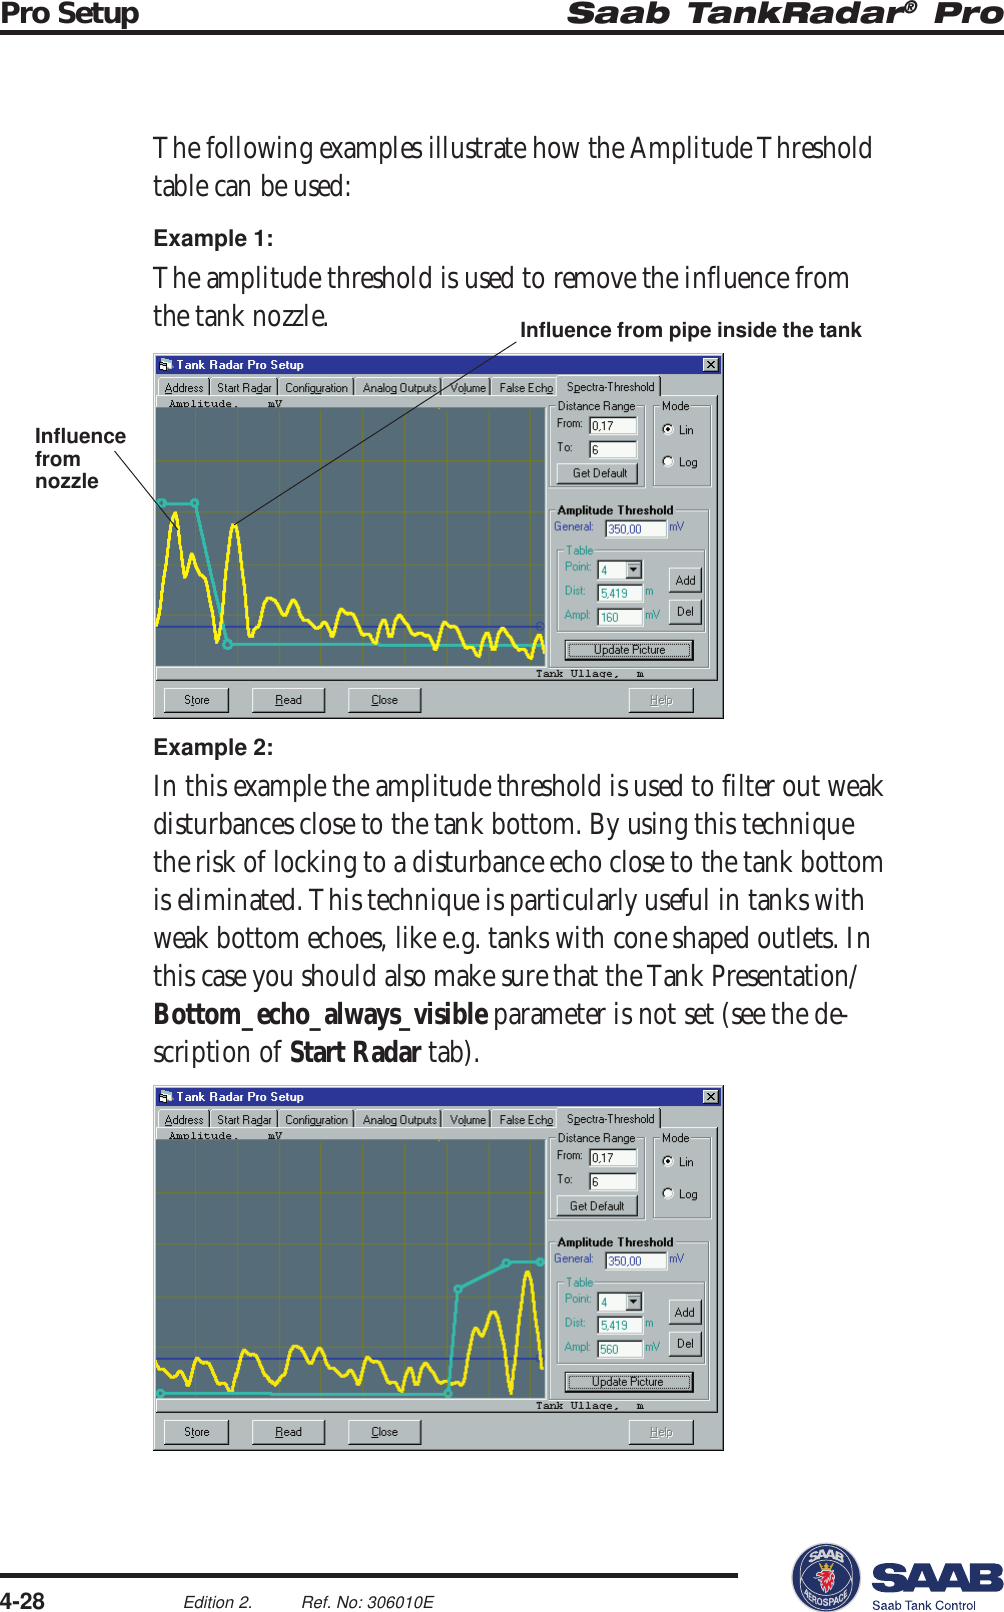 Saab TankRadar® ProPro Setup4-28Edition 2. Ref. No: 306010EThe following examples illustrate how the Amplitude Thresholdtable can be used:Example 1:The amplitude threshold is used to remove the influence fromthe tank nozzle.Example 2:In this example the amplitude threshold is used to filter out weakdisturbances close to the tank bottom. By using this techniquethe risk of locking to a disturbance echo close to the tank bottomis eliminated. This technique is particularly useful in tanks withweak bottom echoes, like e.g. tanks with cone shaped outlets. Inthis case you should also make sure that the Tank Presentation/Bottom_echo_always_visible parameter is not set (see the de-scription of Start Radar tab).InfluencefromnozzleInfluence from pipe inside the tank